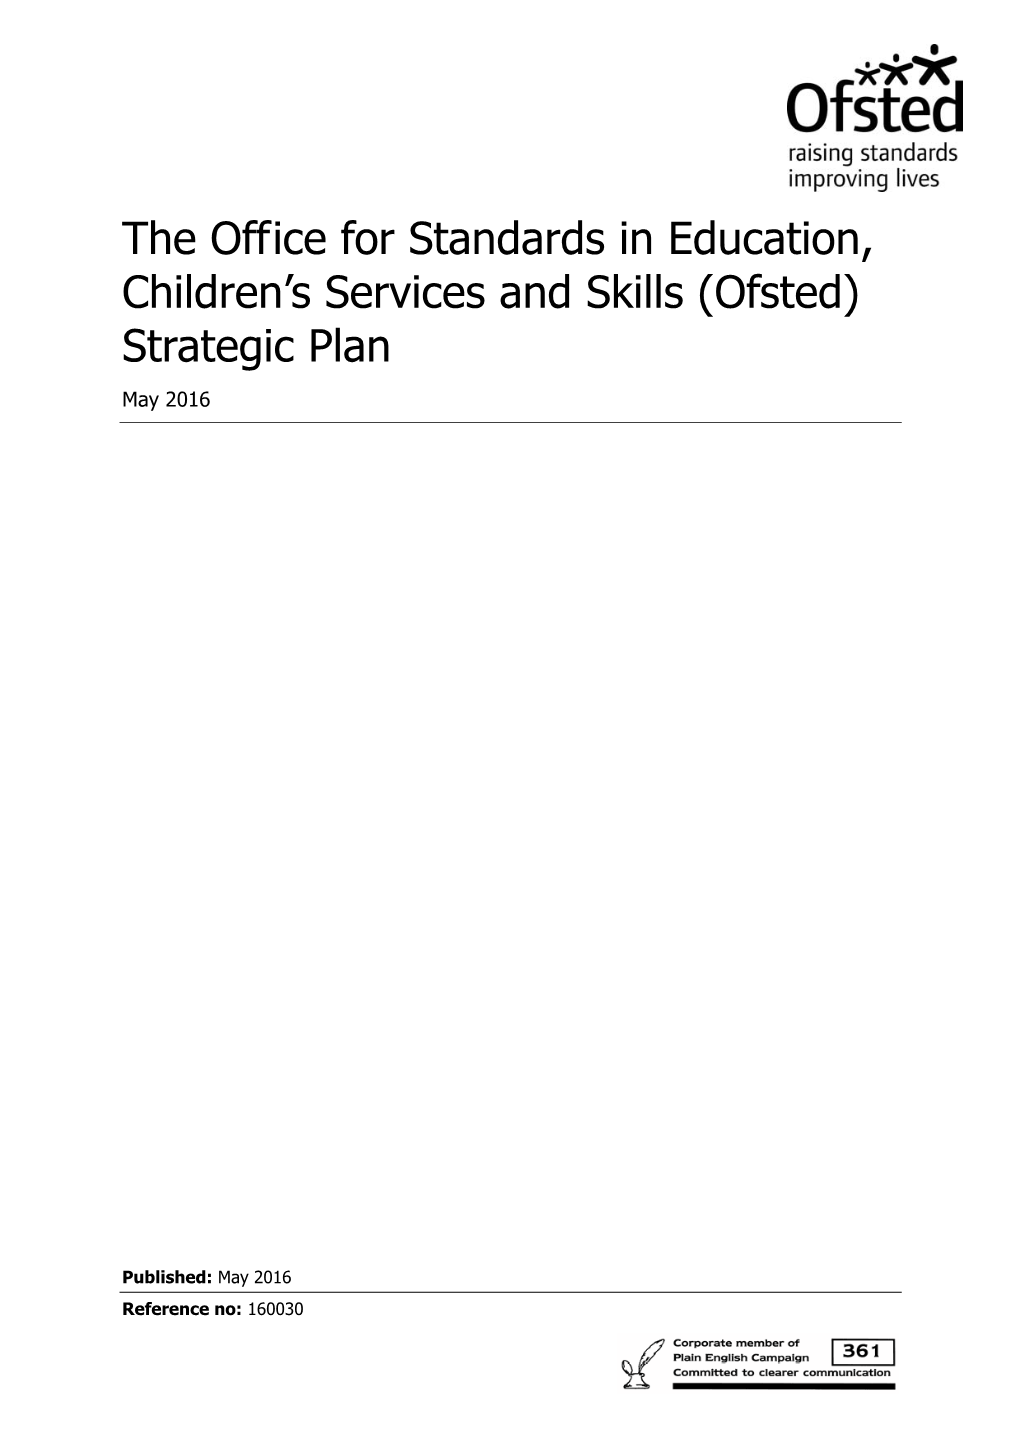 The Office for Standards in Education, Children's Services and Skills